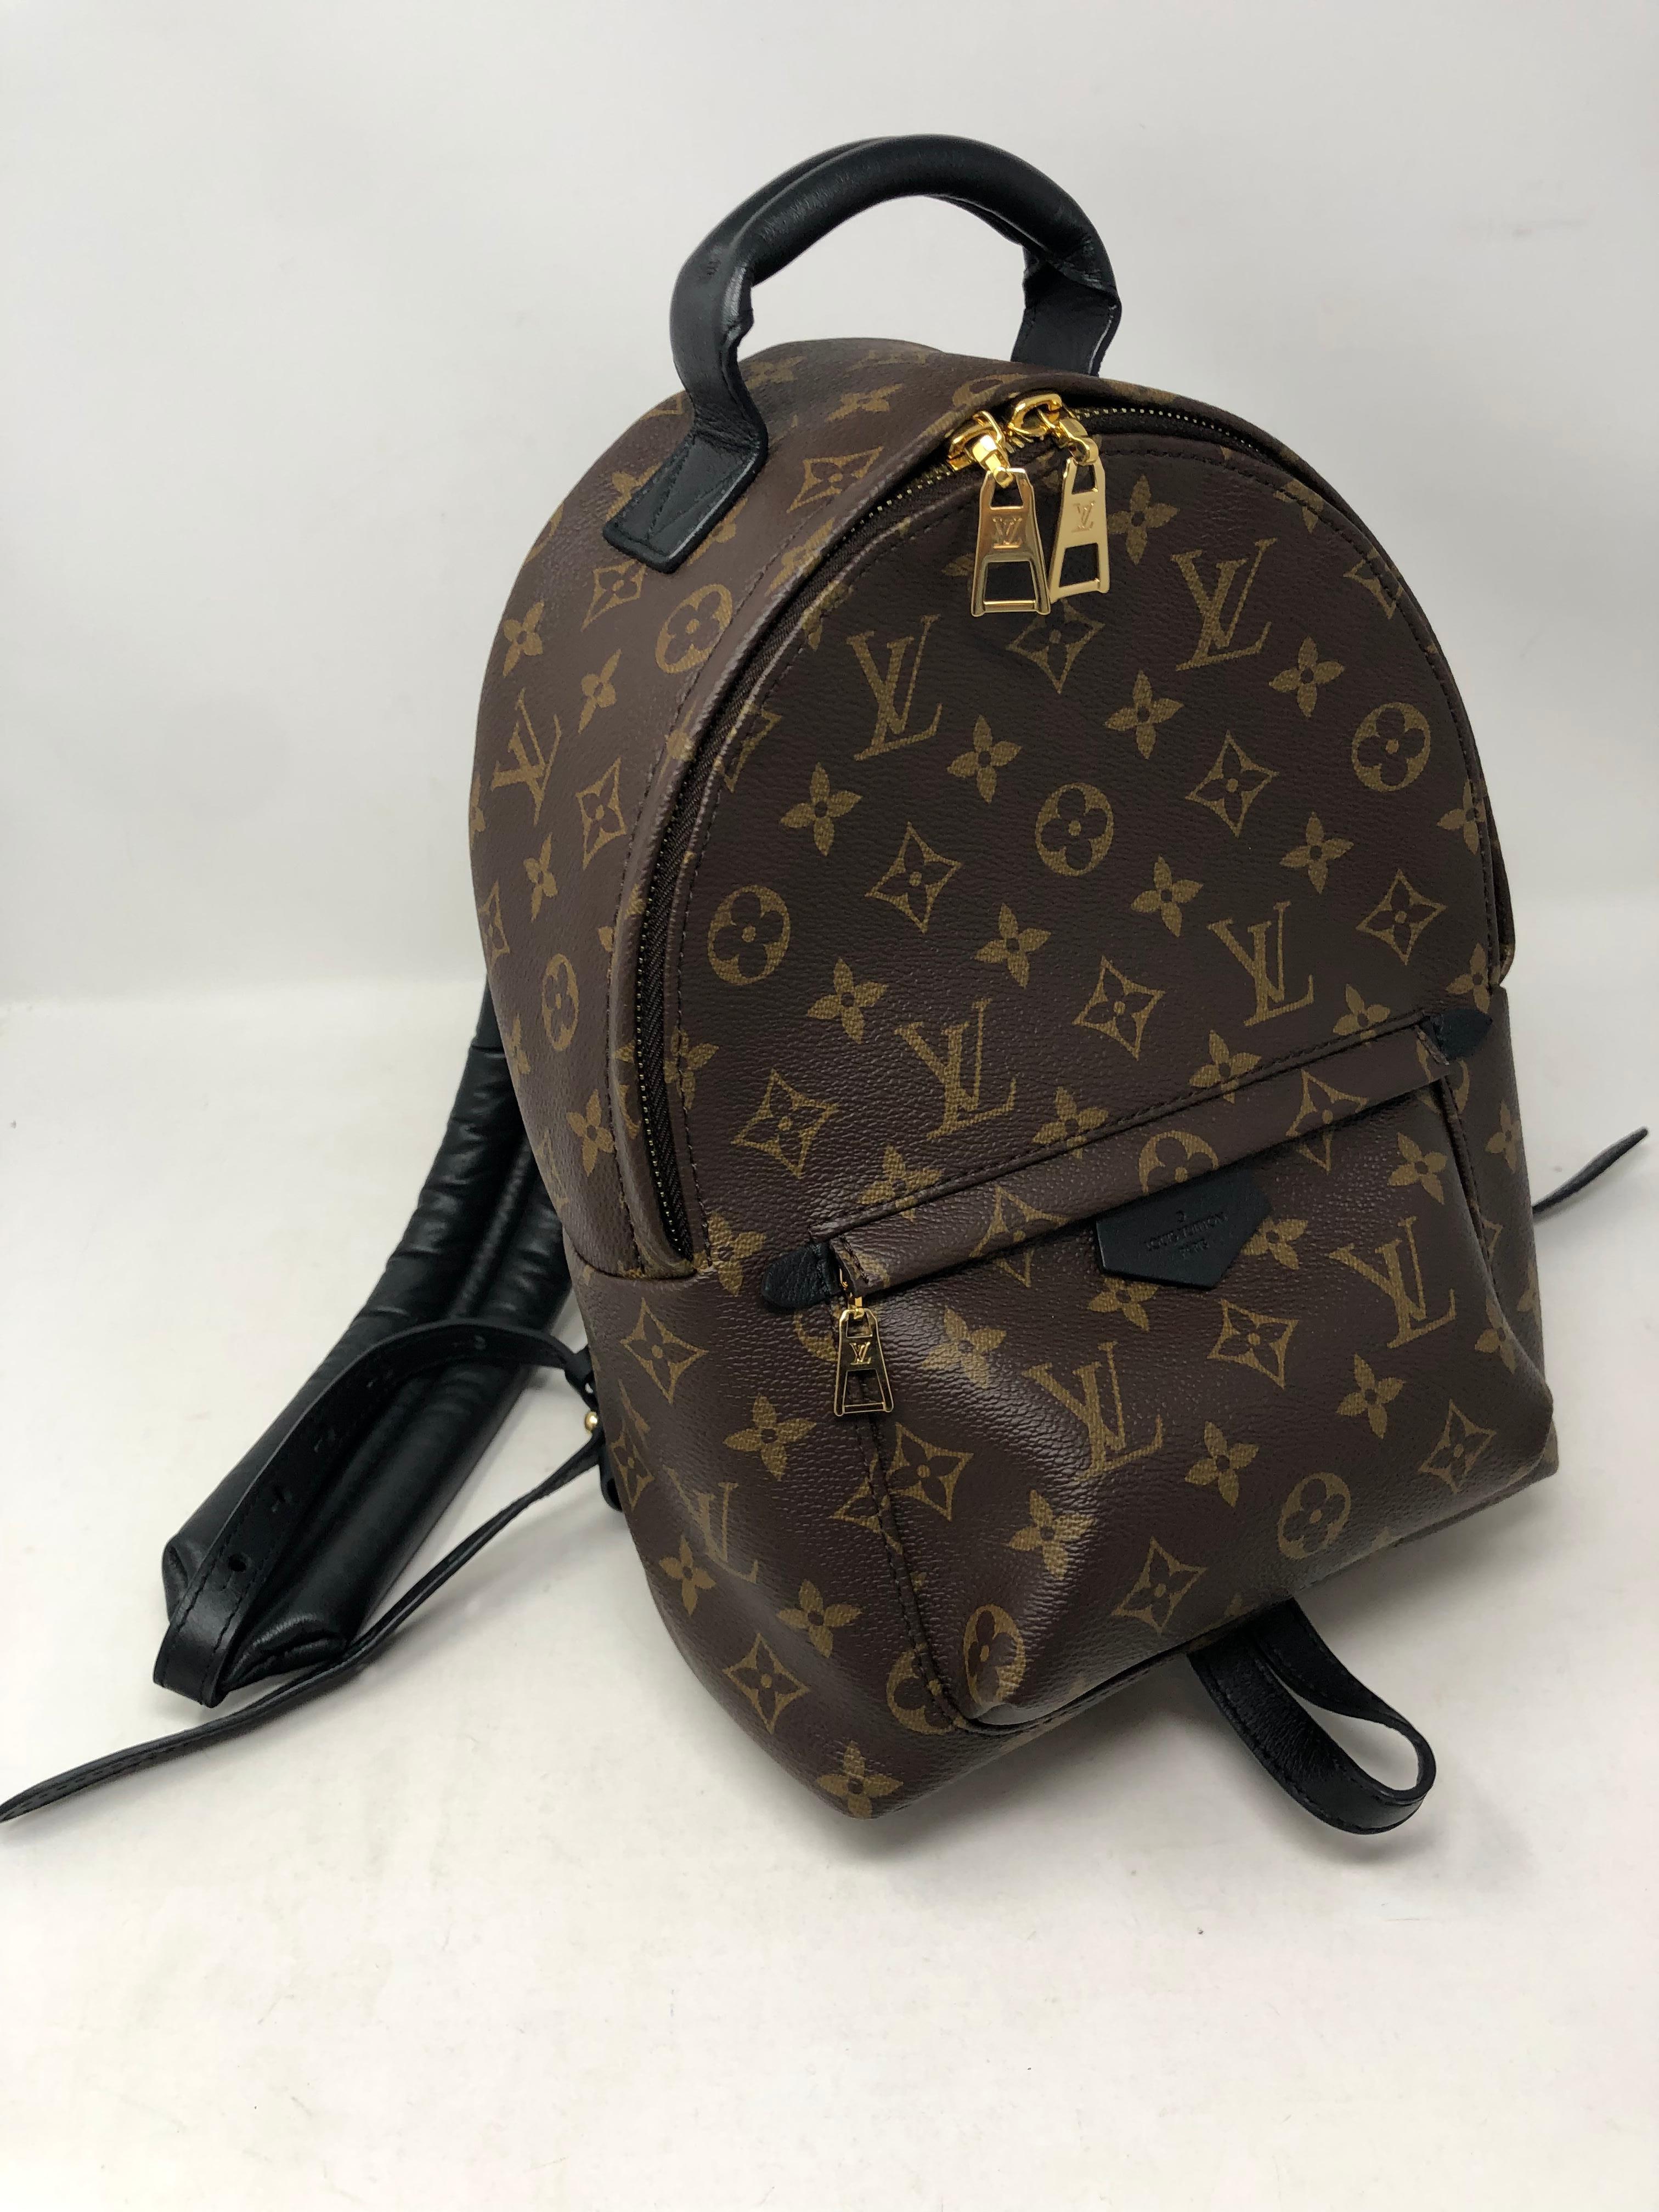 Louis Vuitton Palm Springs PM Backpack Monogram. Black leather shoulder straps and leather trim Backpack. PM size. Mint like new condition. Most wanted backpack. Sold out at LV. Don't miss out. Guaranteed authentic. 